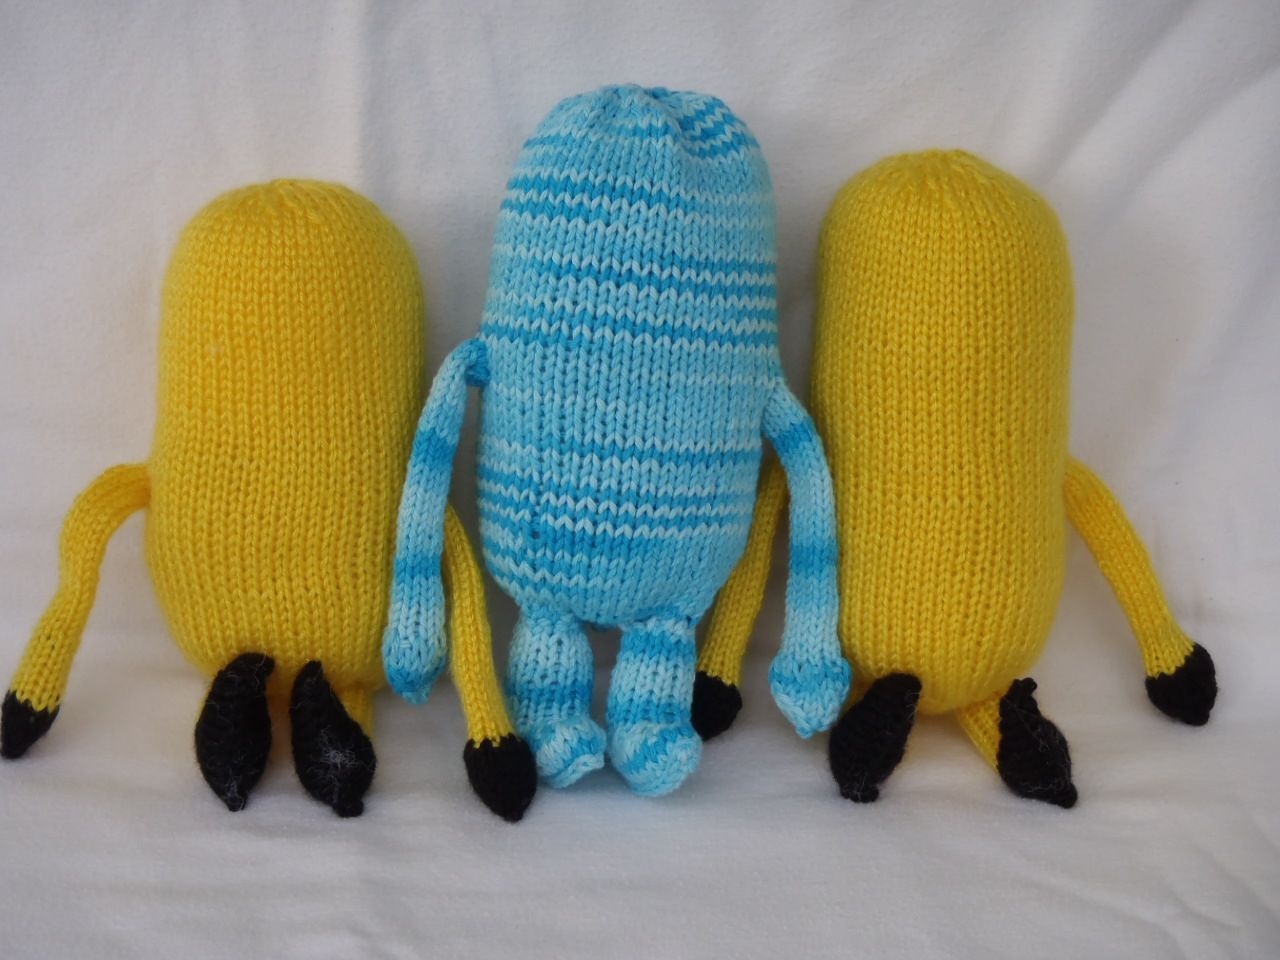 30Great-Photo-of-Knitting-Patterns-For-Minions-minionpattern-Knitting-Patterns.jpg